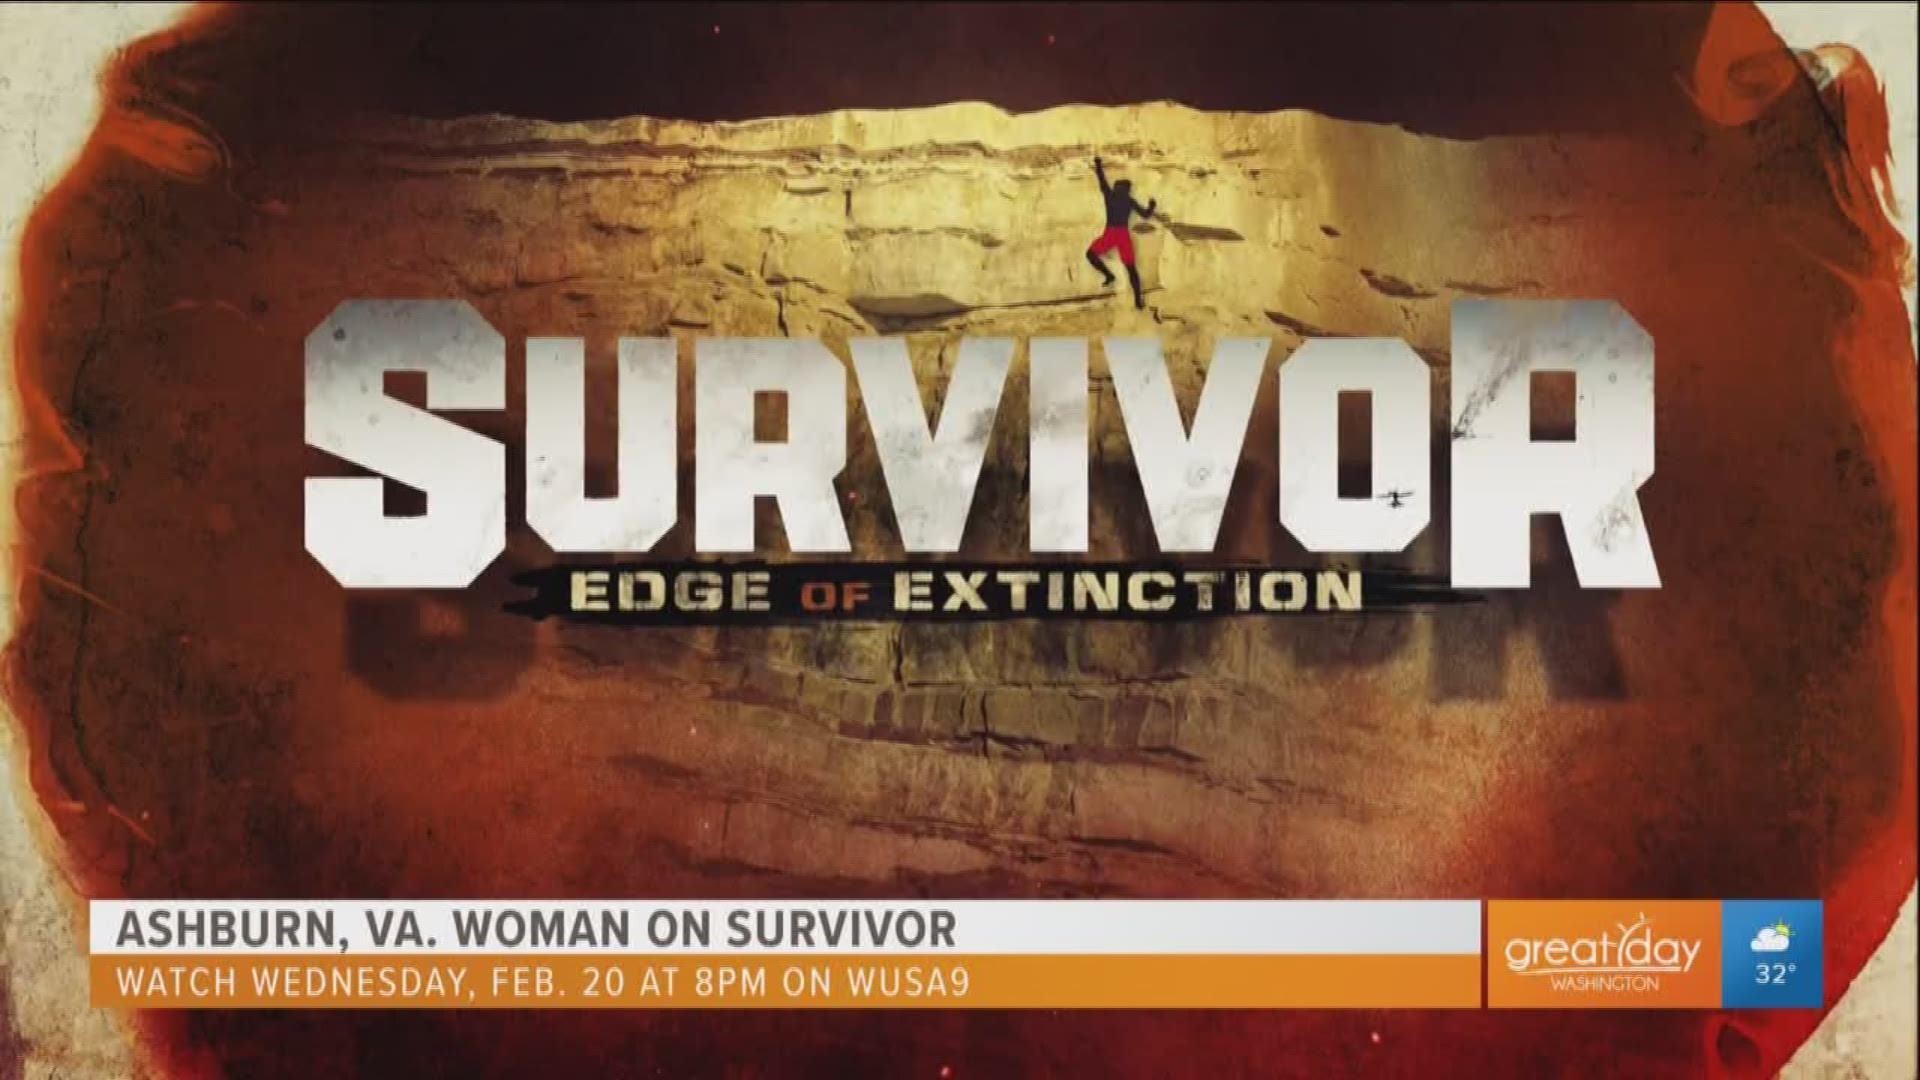 Ashburn, Va. resident, Reem Daly dishes about her experience on the 38th season of Survivor including how she auditioned for the show and if the drama is real or scripted. Watch Survivor on Wednesdays at 8pm on WUSA9.